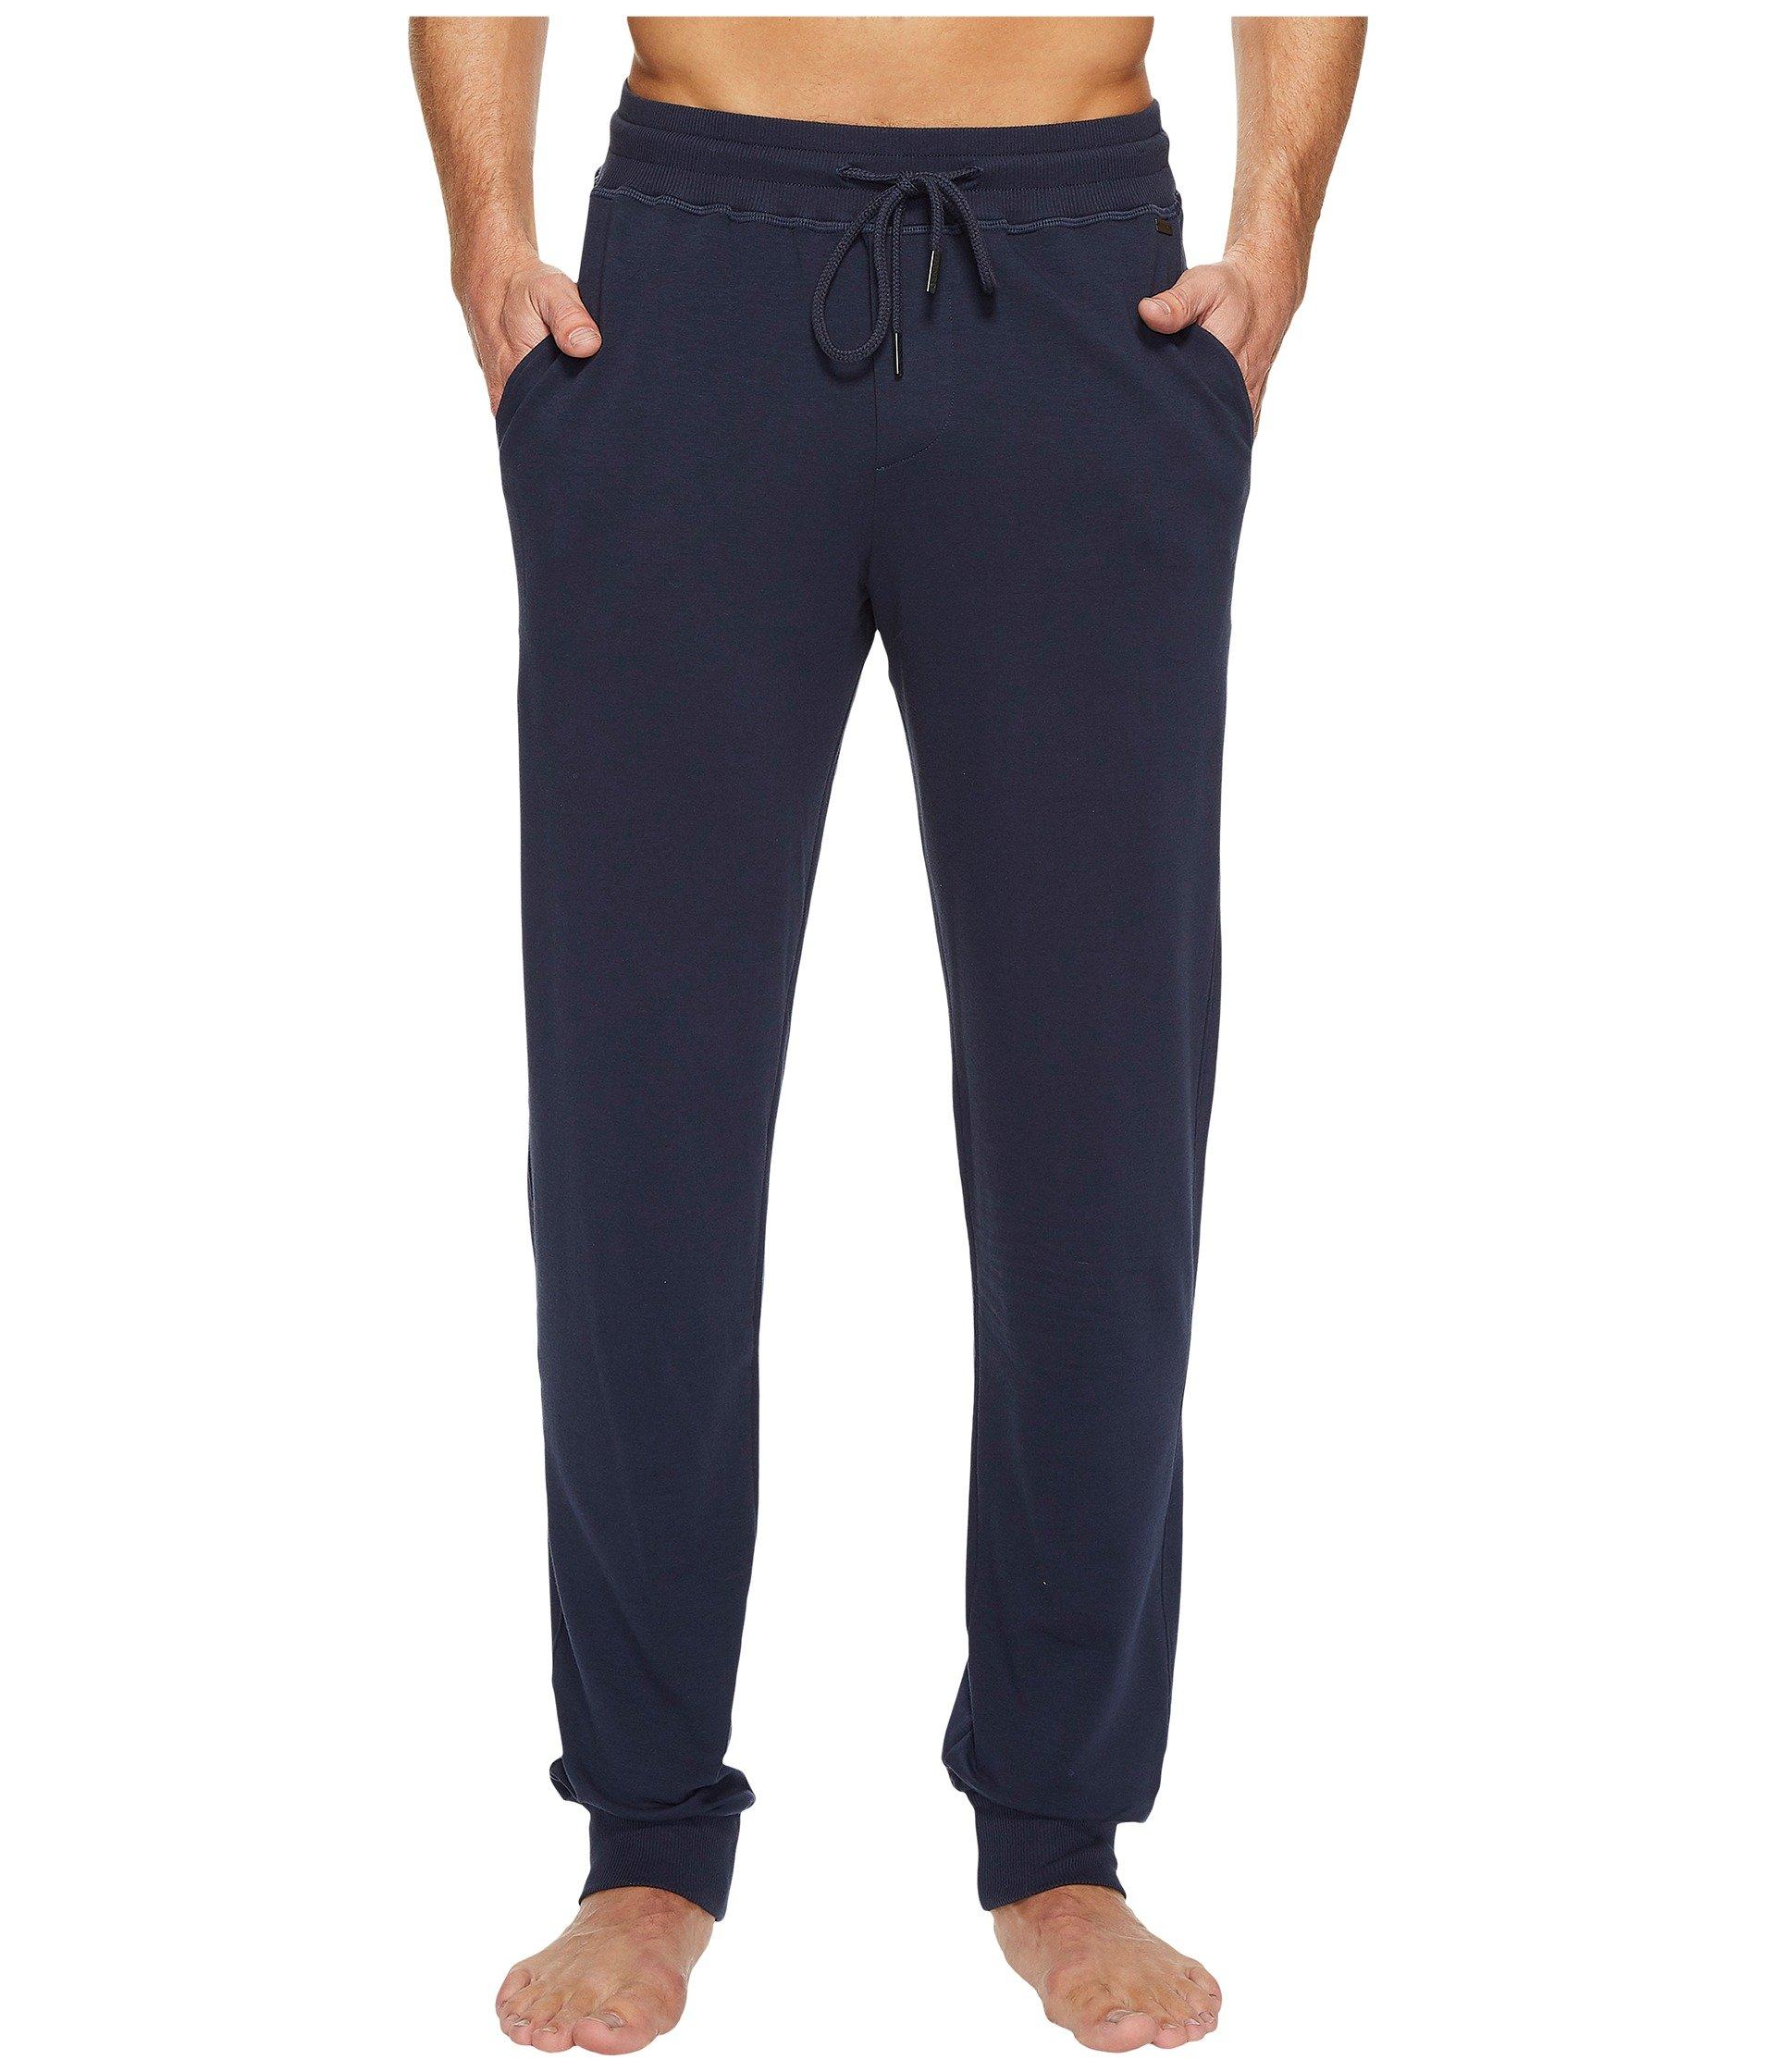 Hanro Cotton Living Lounge Pants in Black for Men - Lyst